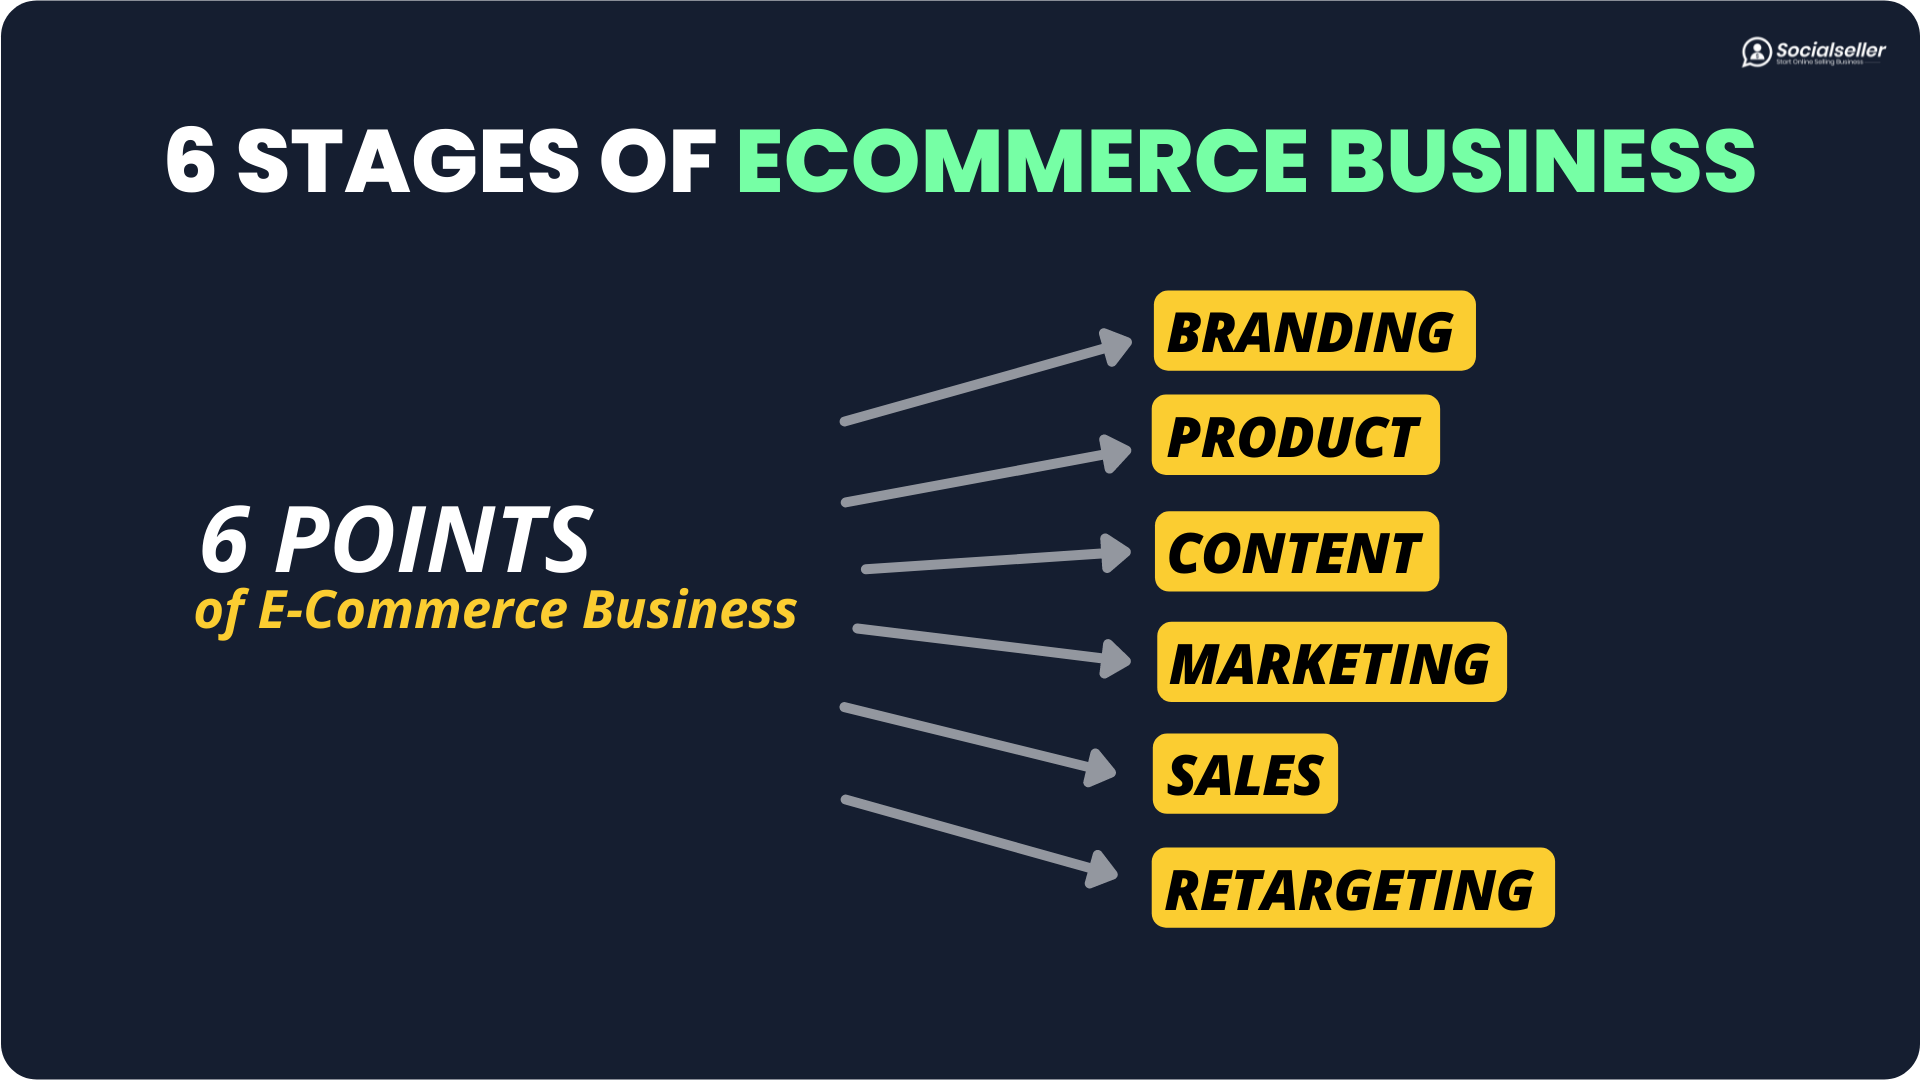 Process Of Ecommerce Business